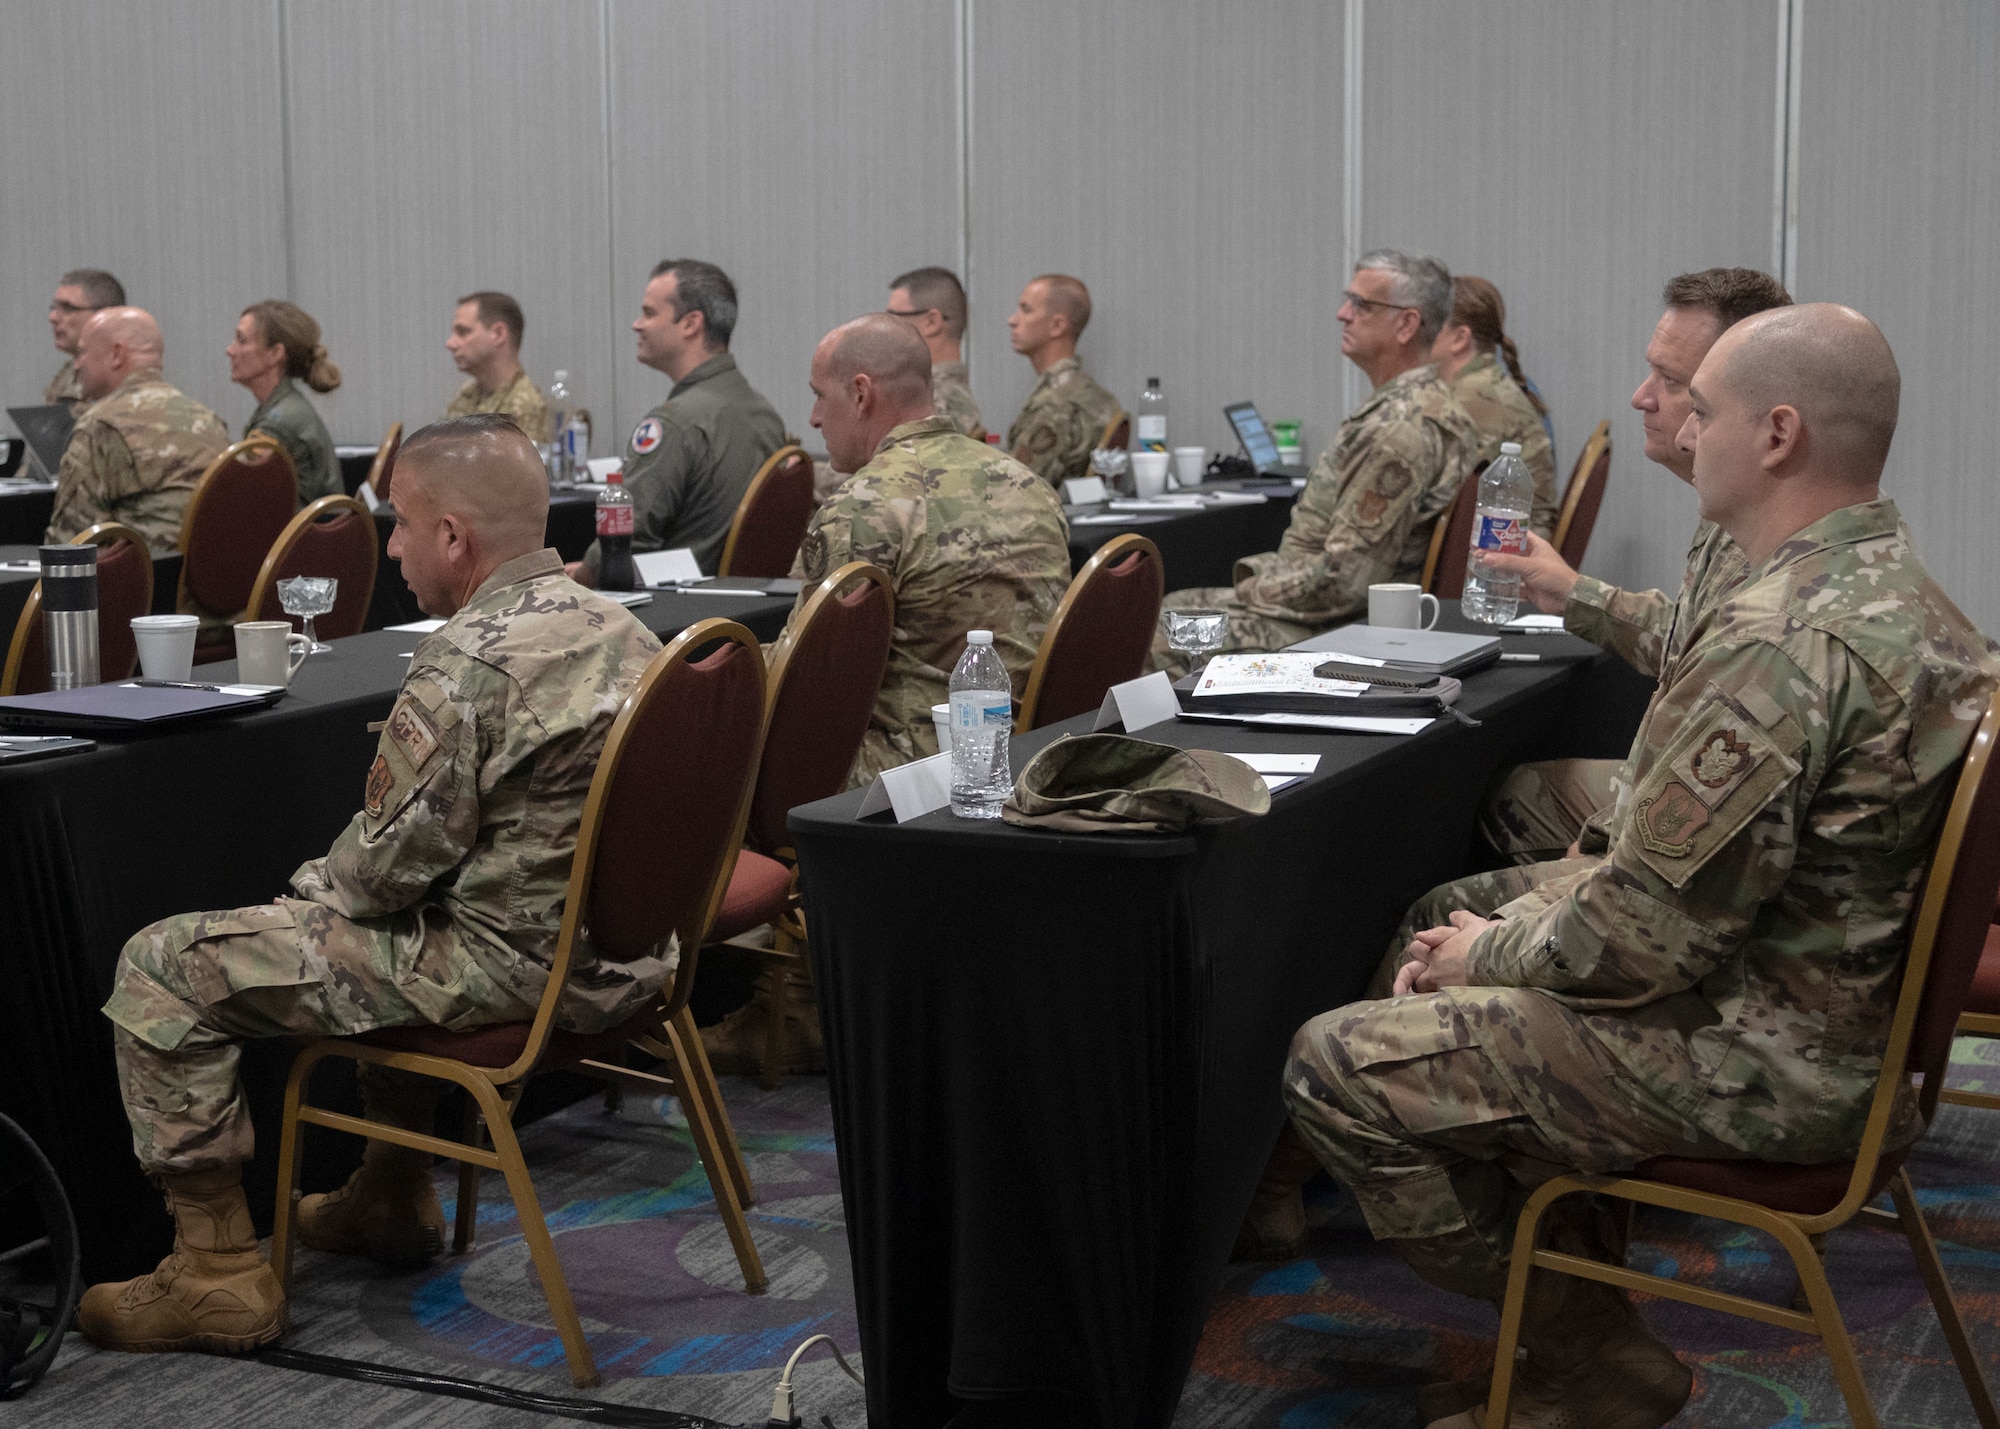 Commander points to paper while addressing 40 people in a room during Inspector General Inspection (IGI) teams across the Numbered Air Force during the first-ever 10th AF IGI conference